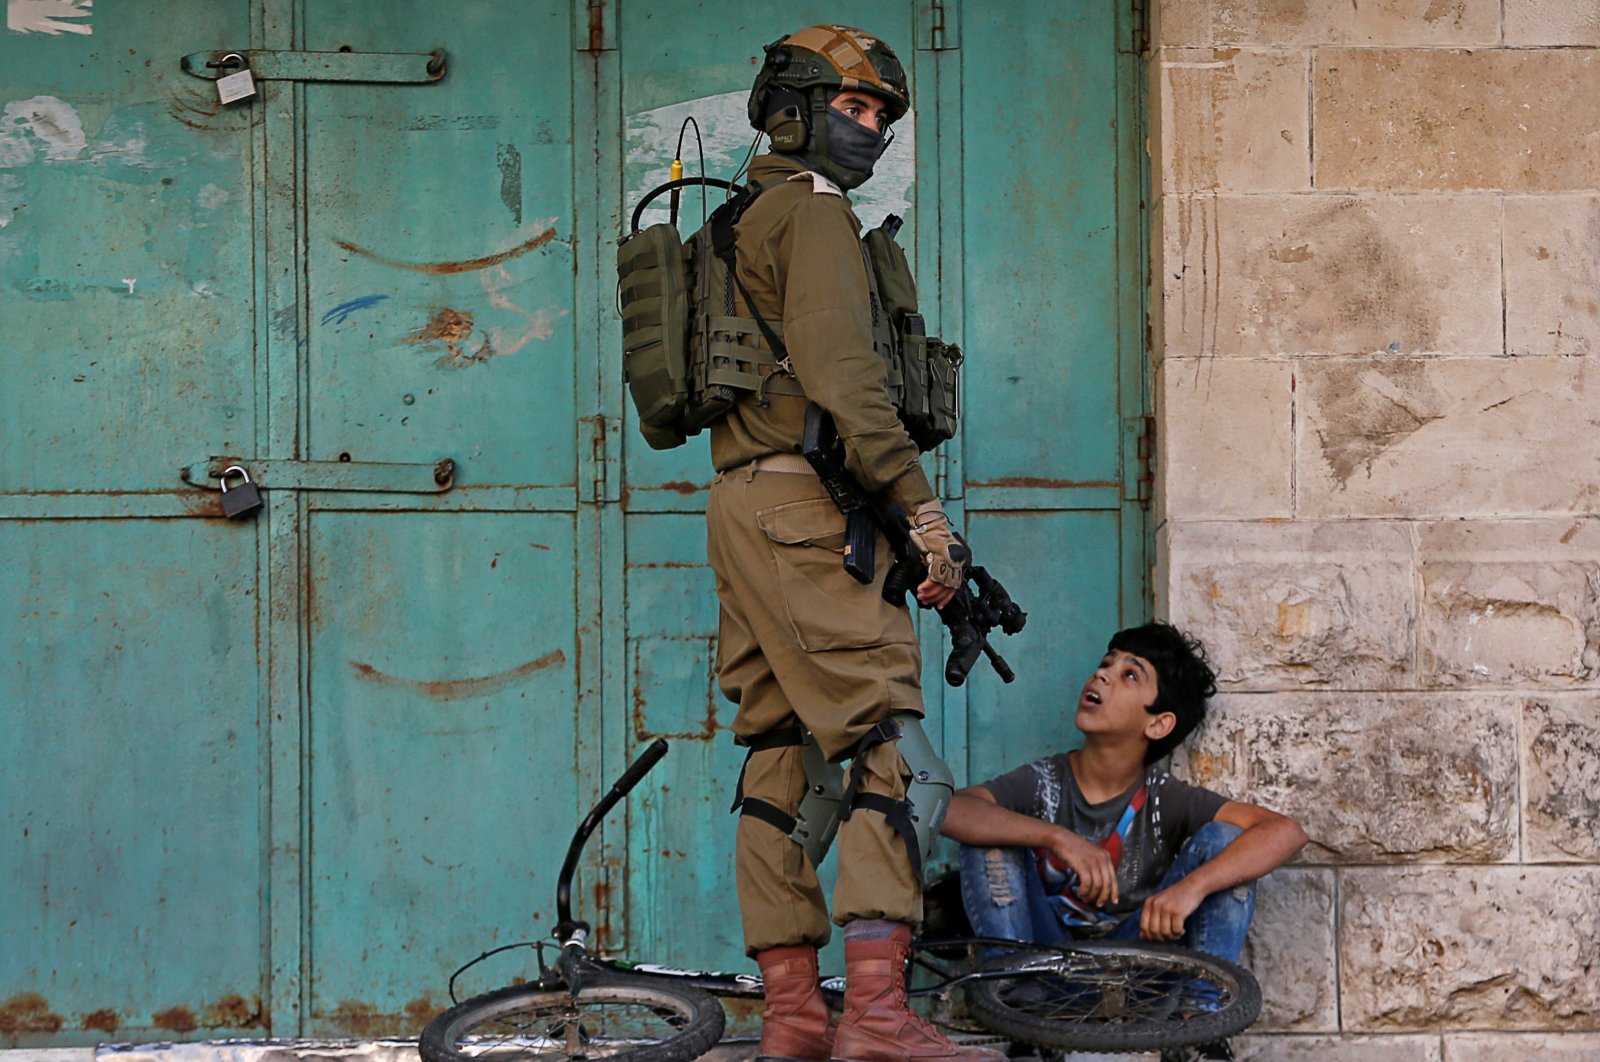 An Israeli soldier detains a Palestinian boy during an anti-Israel protest in Hebron in the Israeli-occupied West Bank, Palestine, Nov. 29, 2019. (Reuters File Photo)